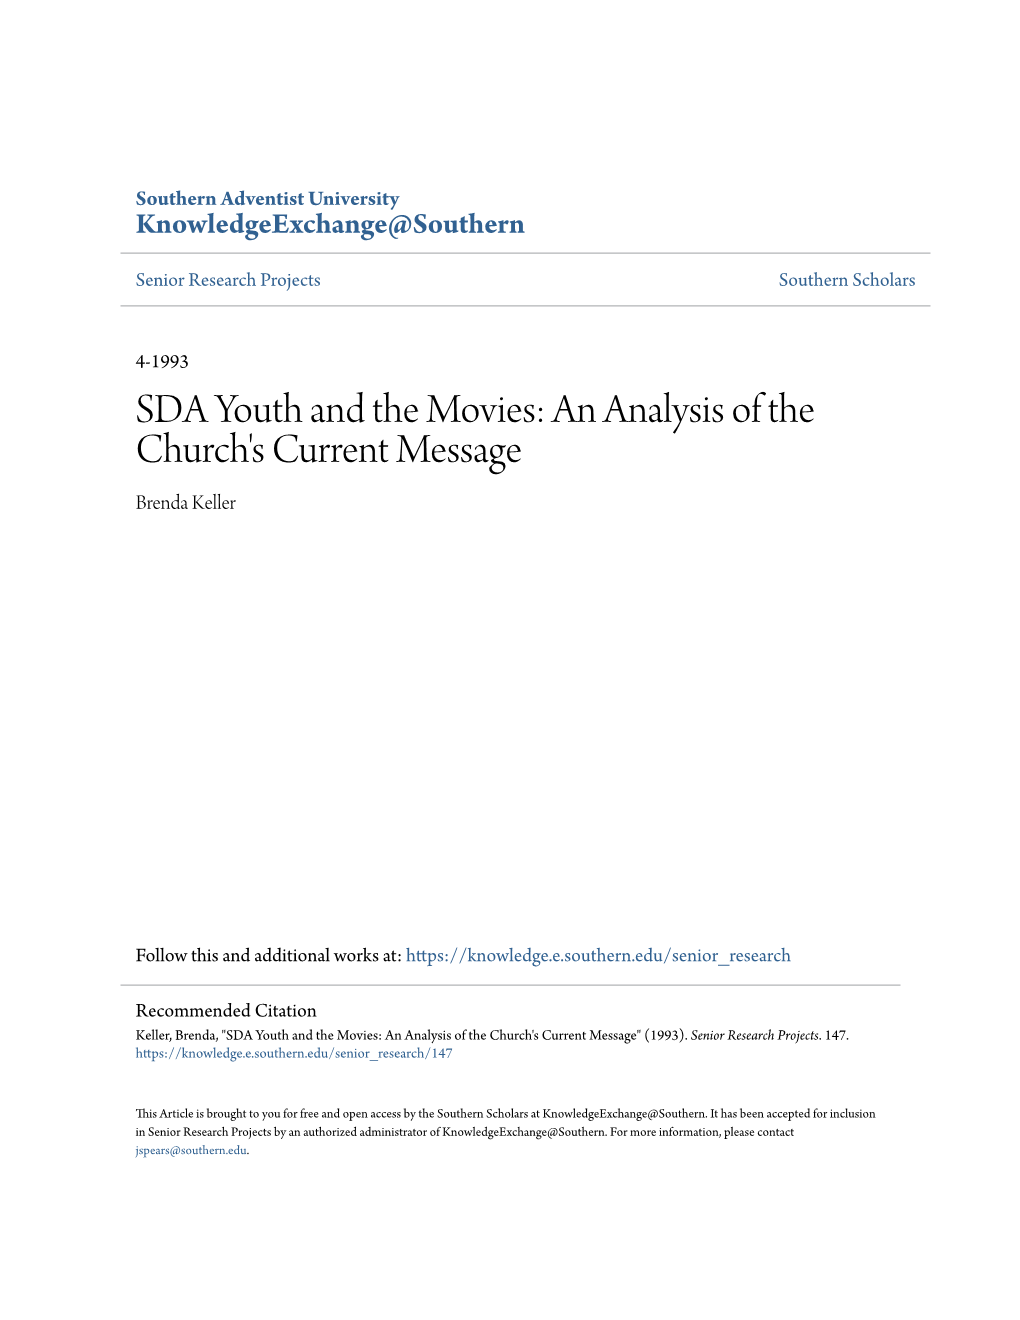 SDA Youth and the Movies: an Analysis of the Church's Current Message Brenda Keller